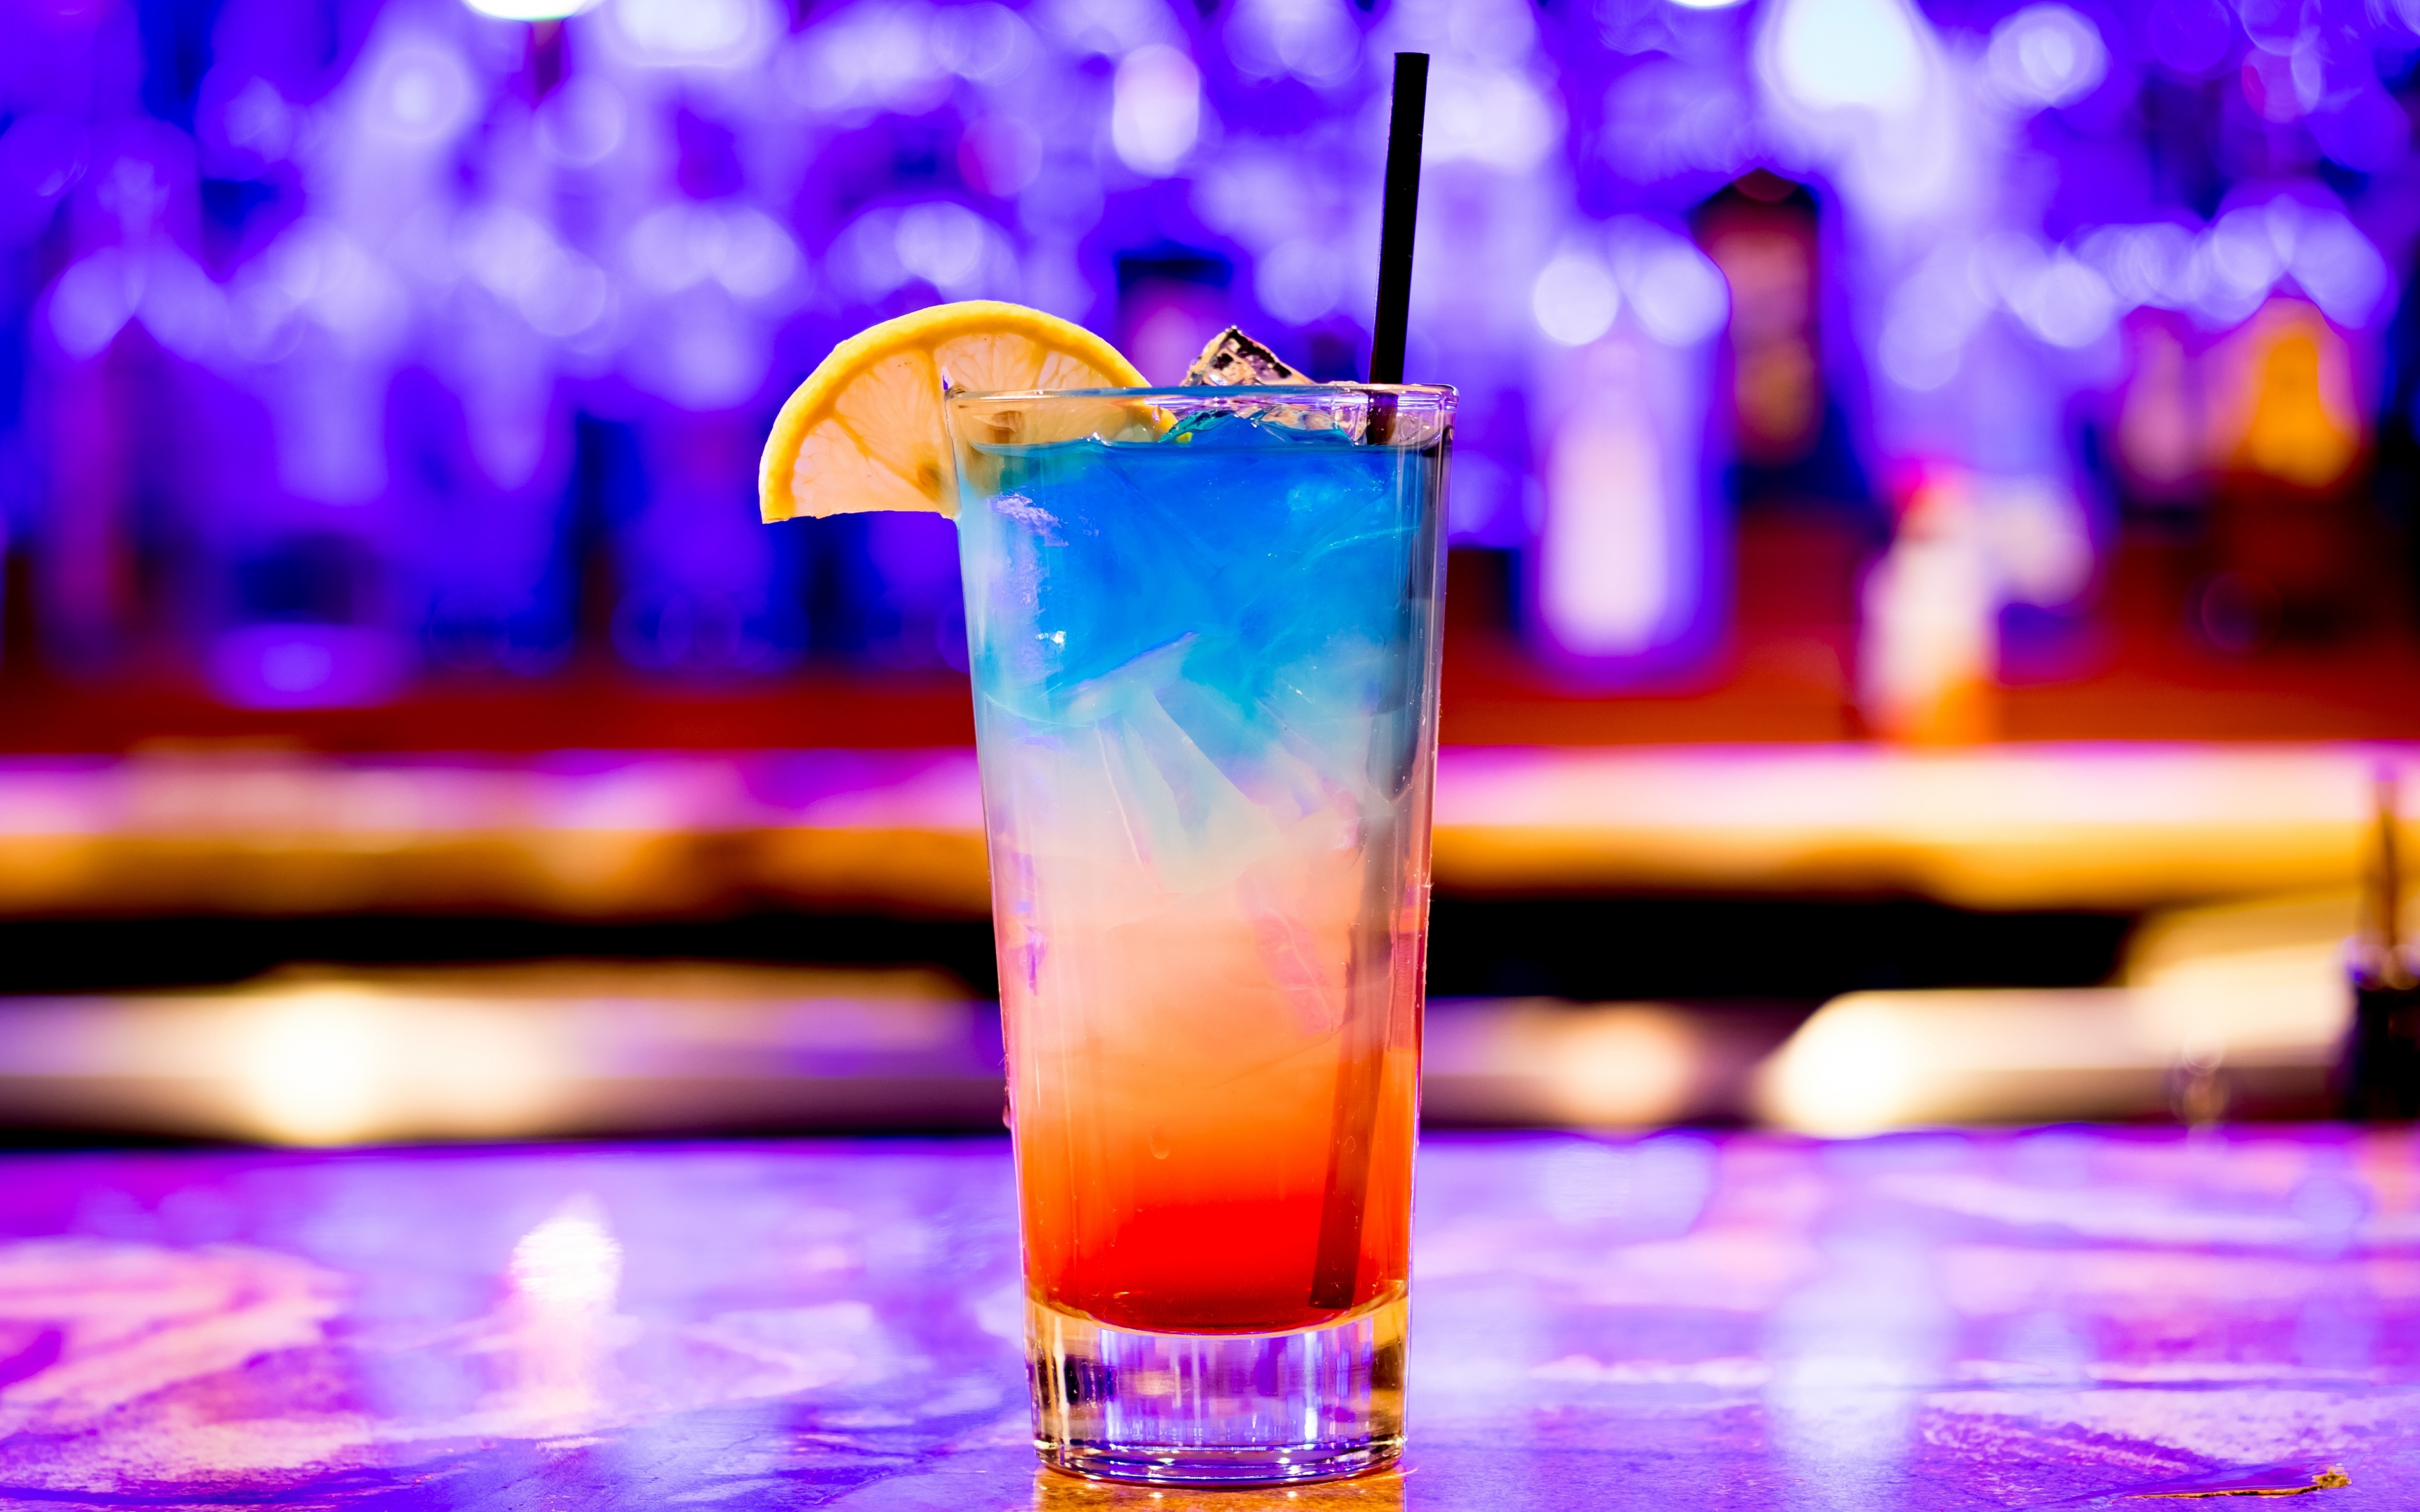 Cocktail, colorful, summer, drink, close up, 3840x2400 wallpaper